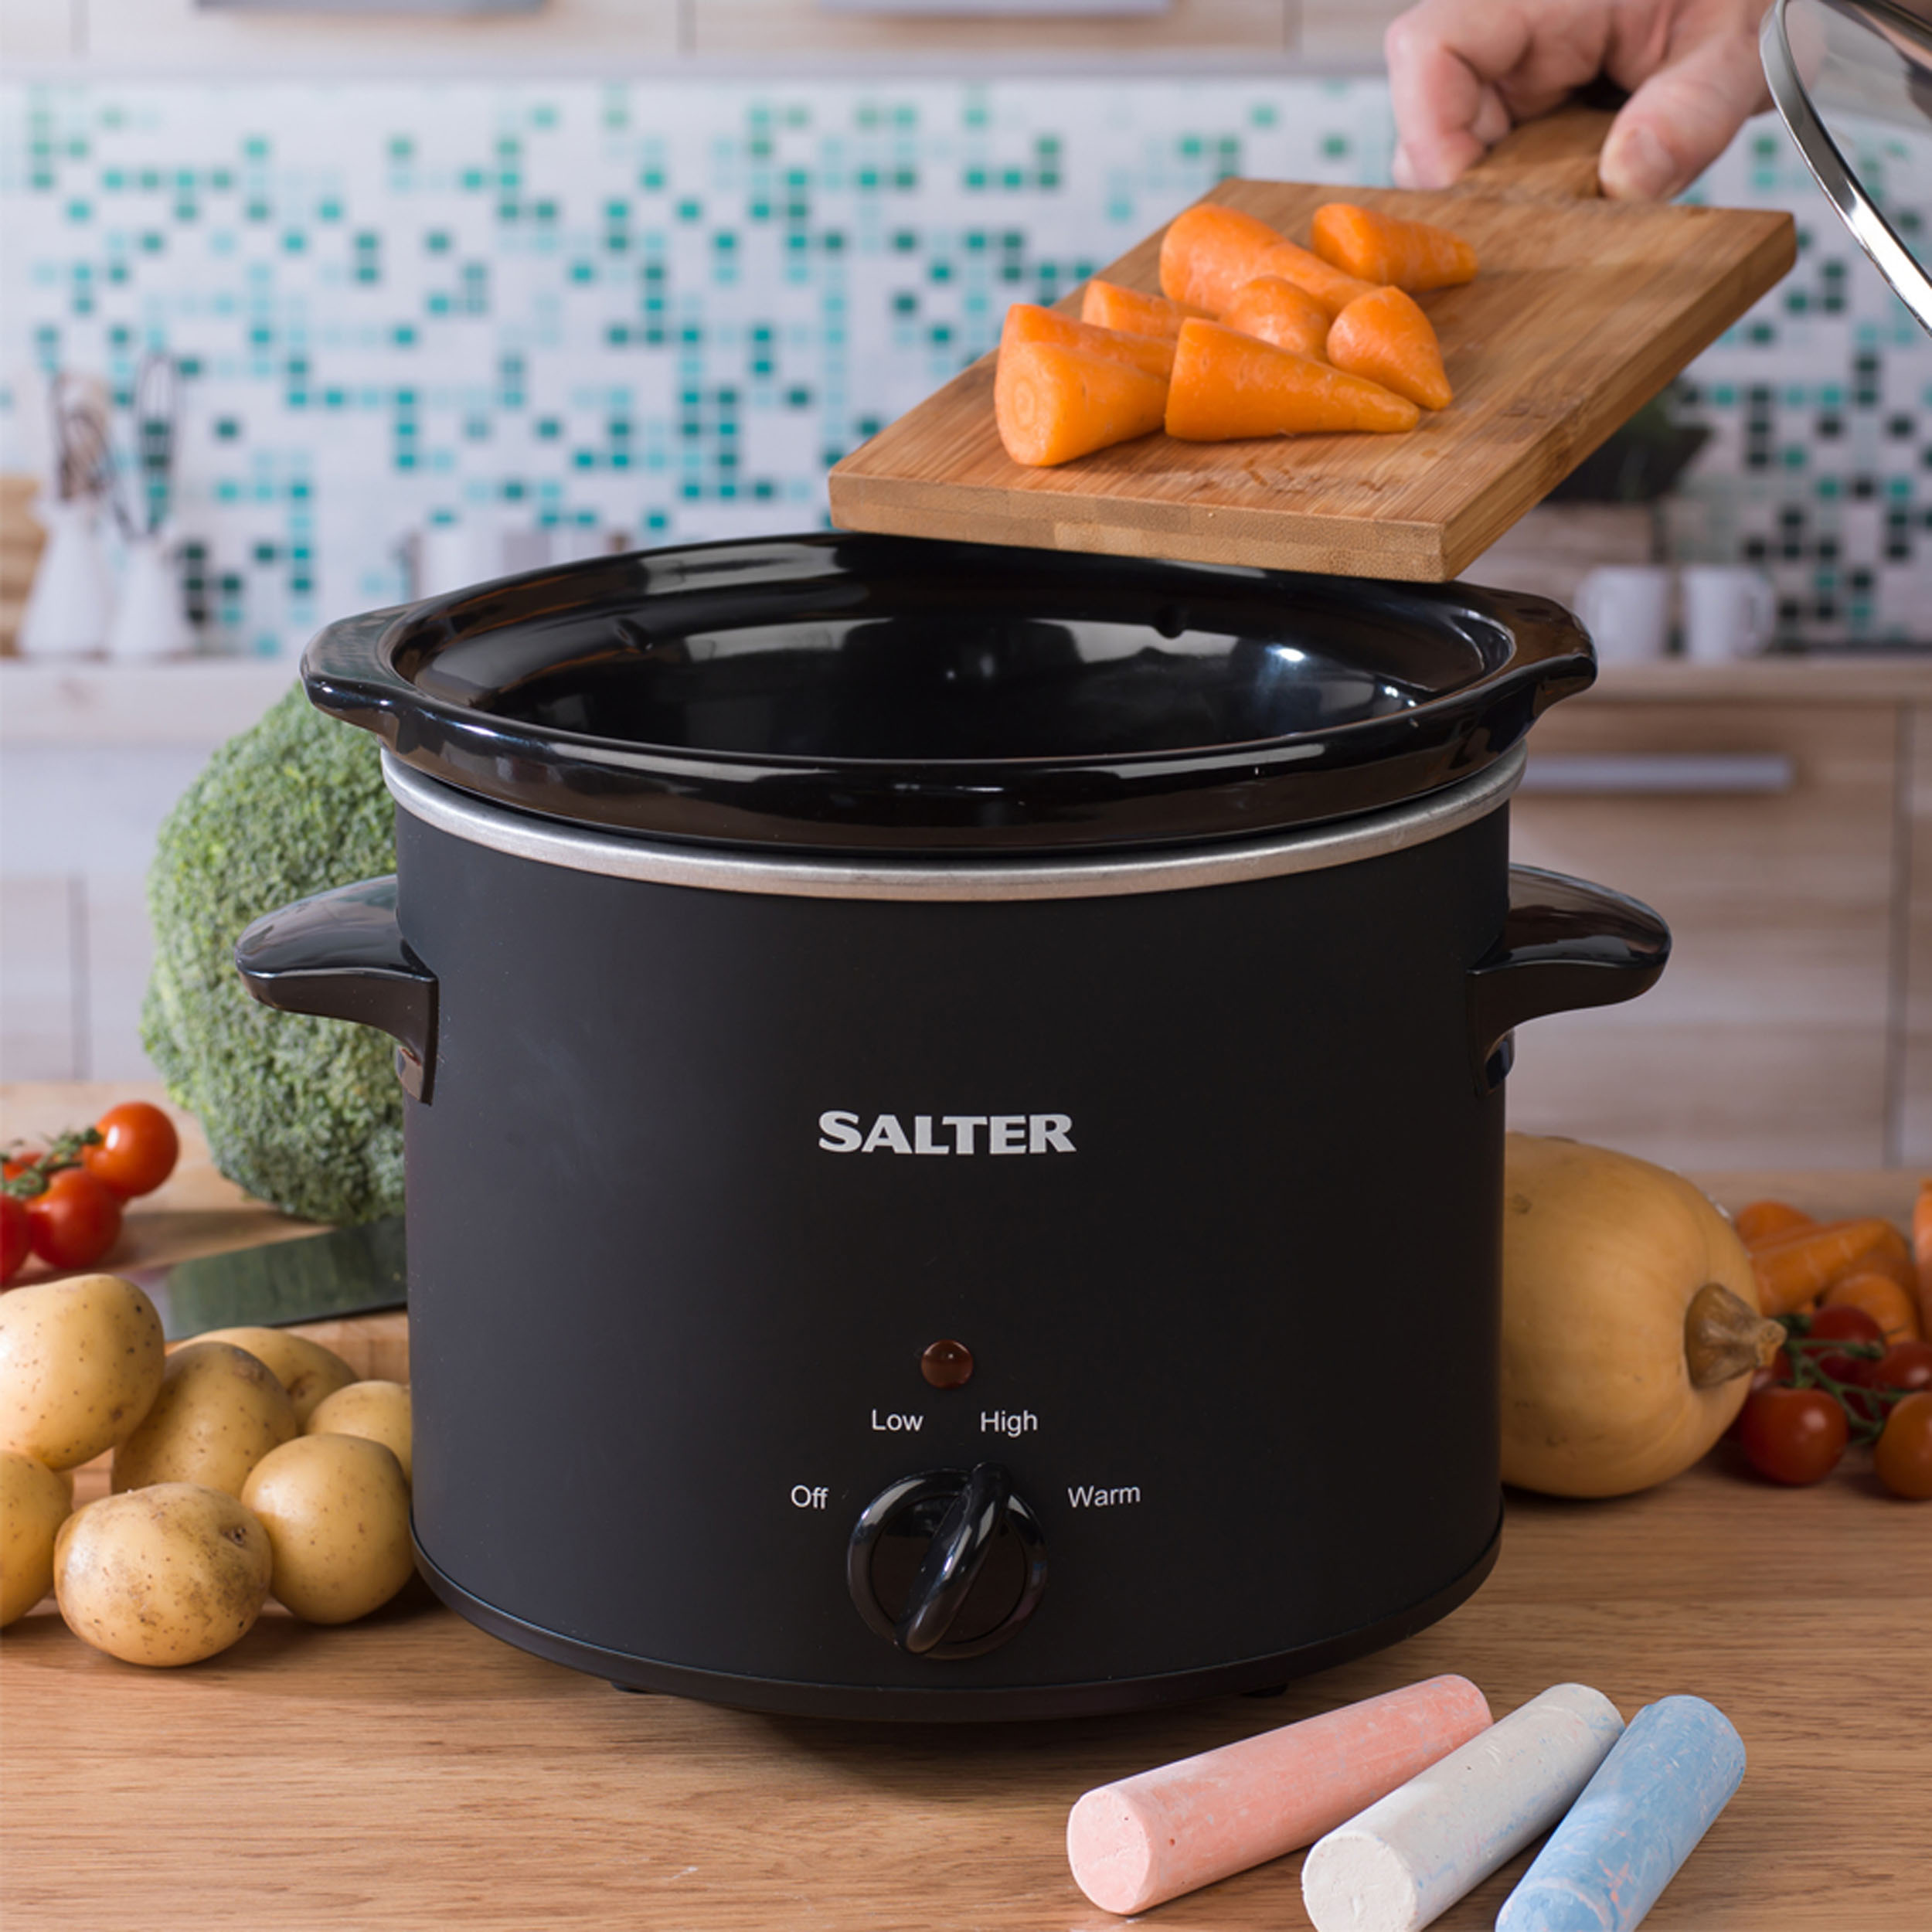 A Salter calkboard slow cooker with carrots being put into it